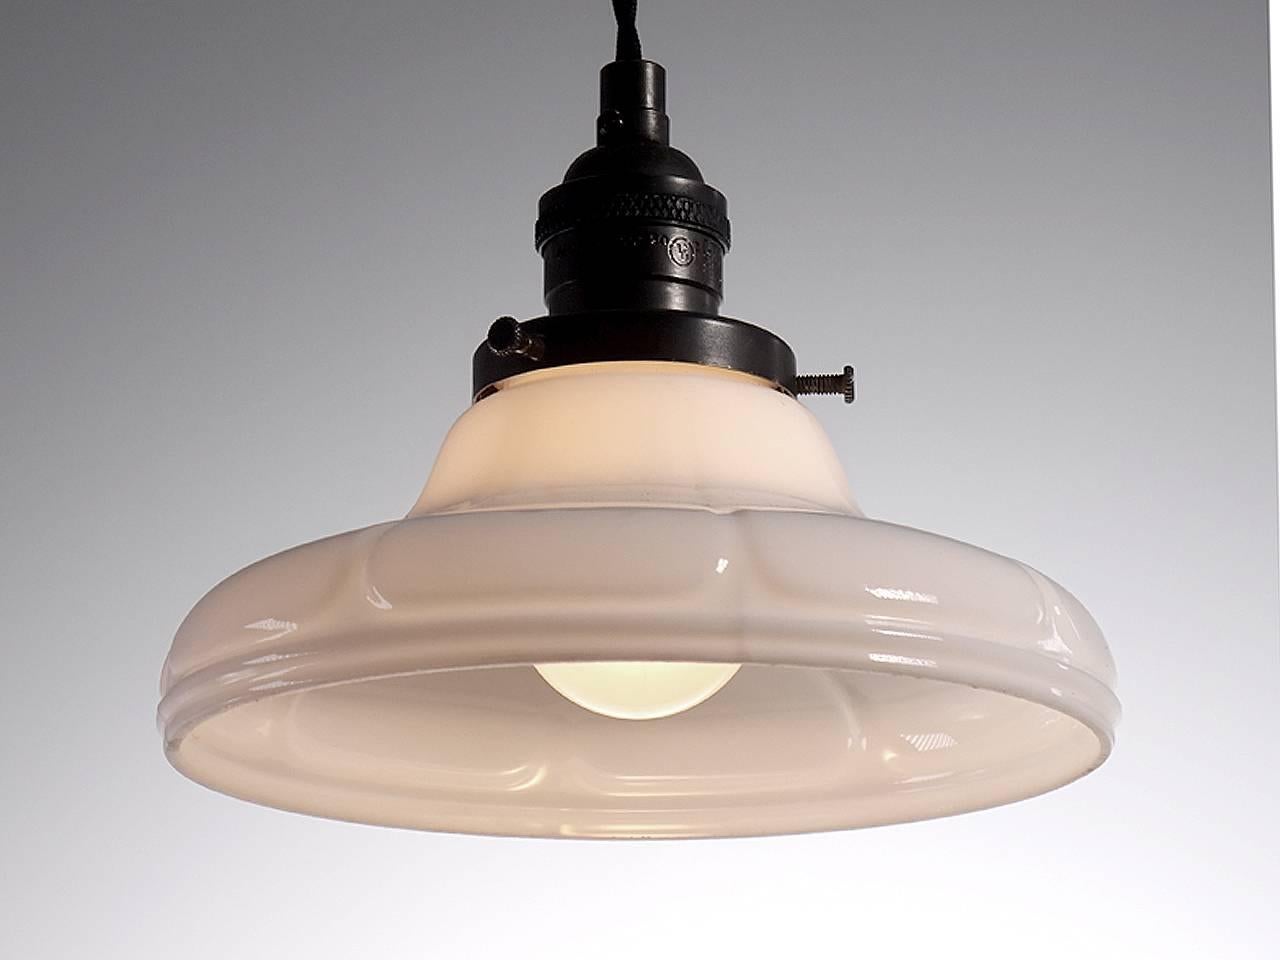 Softly curved bell shaped pendants are a Classic. They feel at home with any style decor. This example has a simple stylized flower pedal design. The pattern is a bit deco and the profile has a straight bottom edge. The lamps are priced per so you